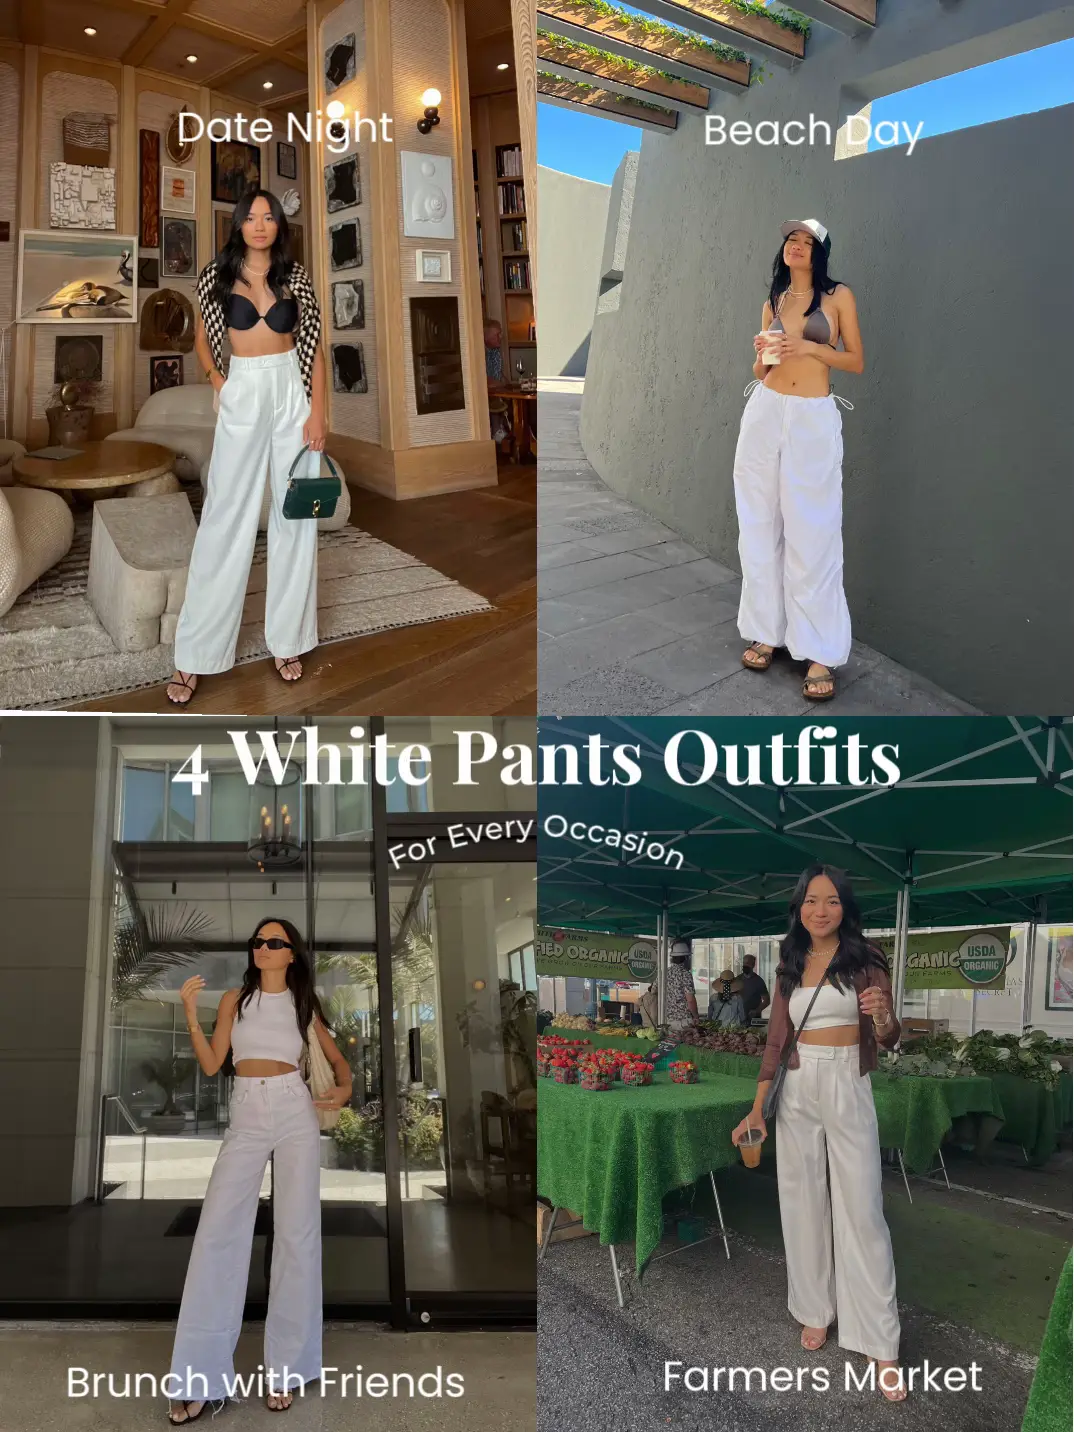 4 White Pants Outfits: For Every Occasion